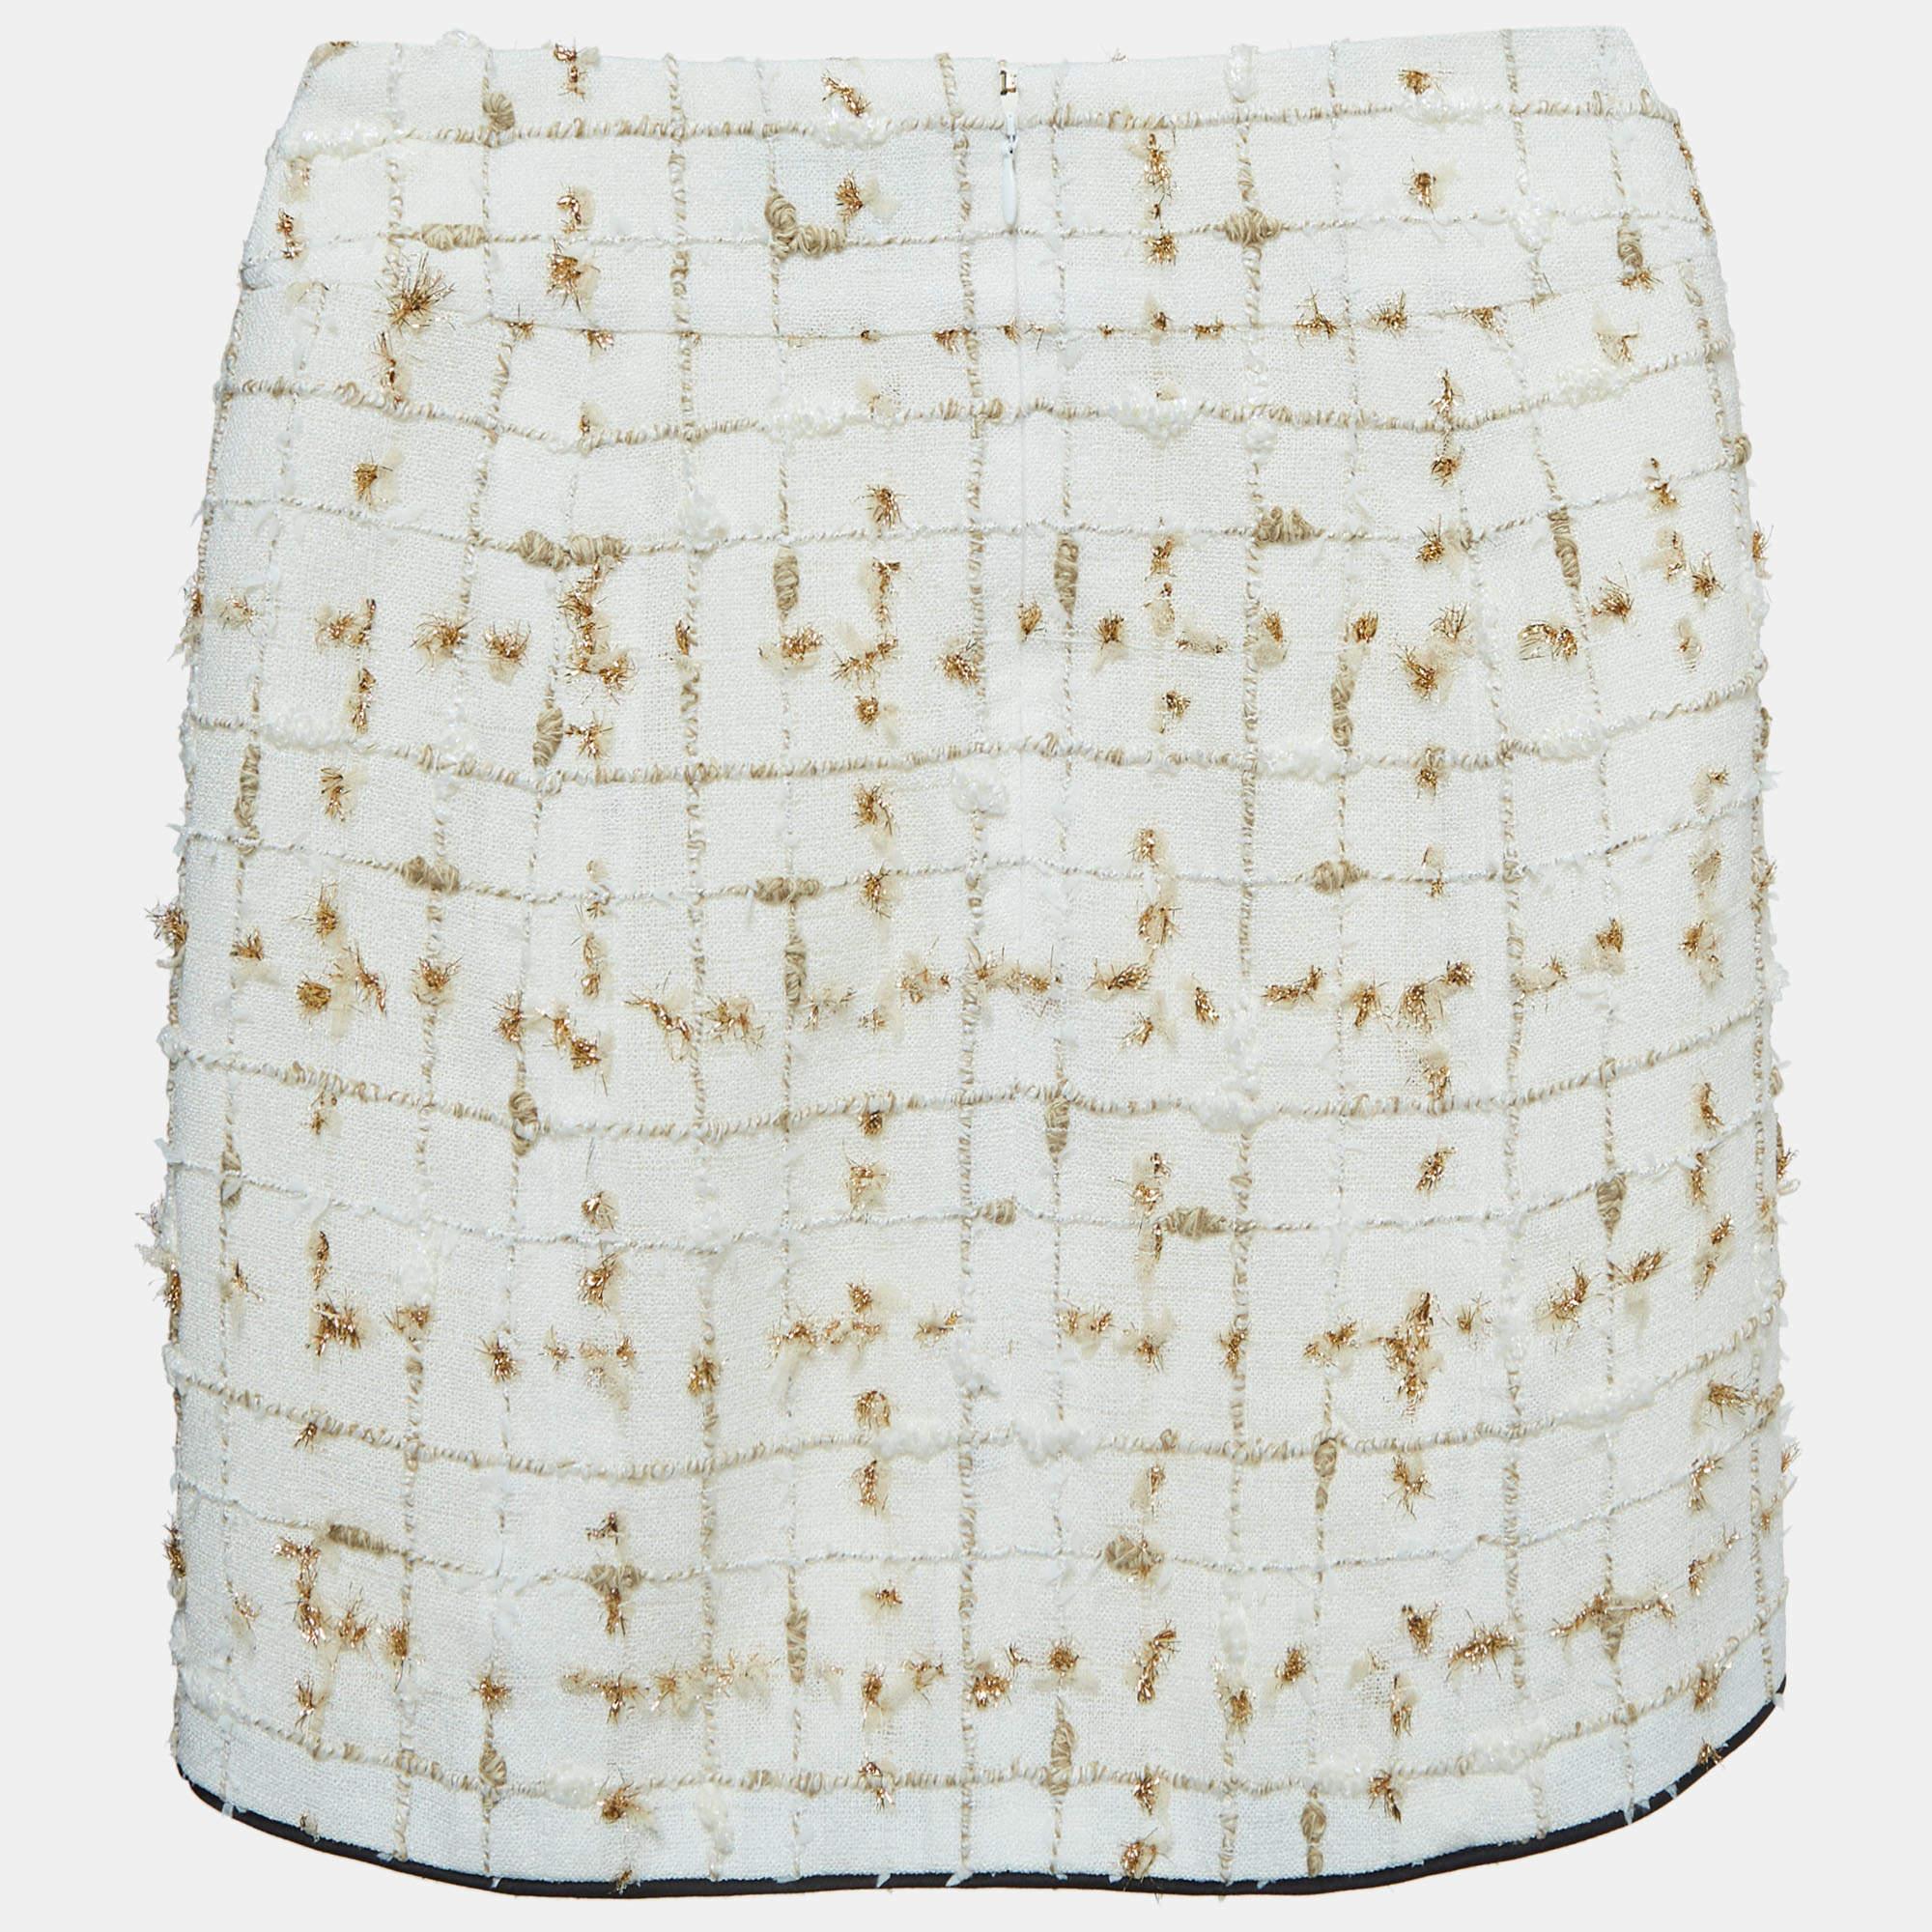 Indulge in timeless elegance with the Chanel tweed skirt. Crafted with meticulous attention to detail, this exquisite piece features a sophisticated blend of white and gold hues, woven into a classic tweed pattern, exuding sophistication and charm.

